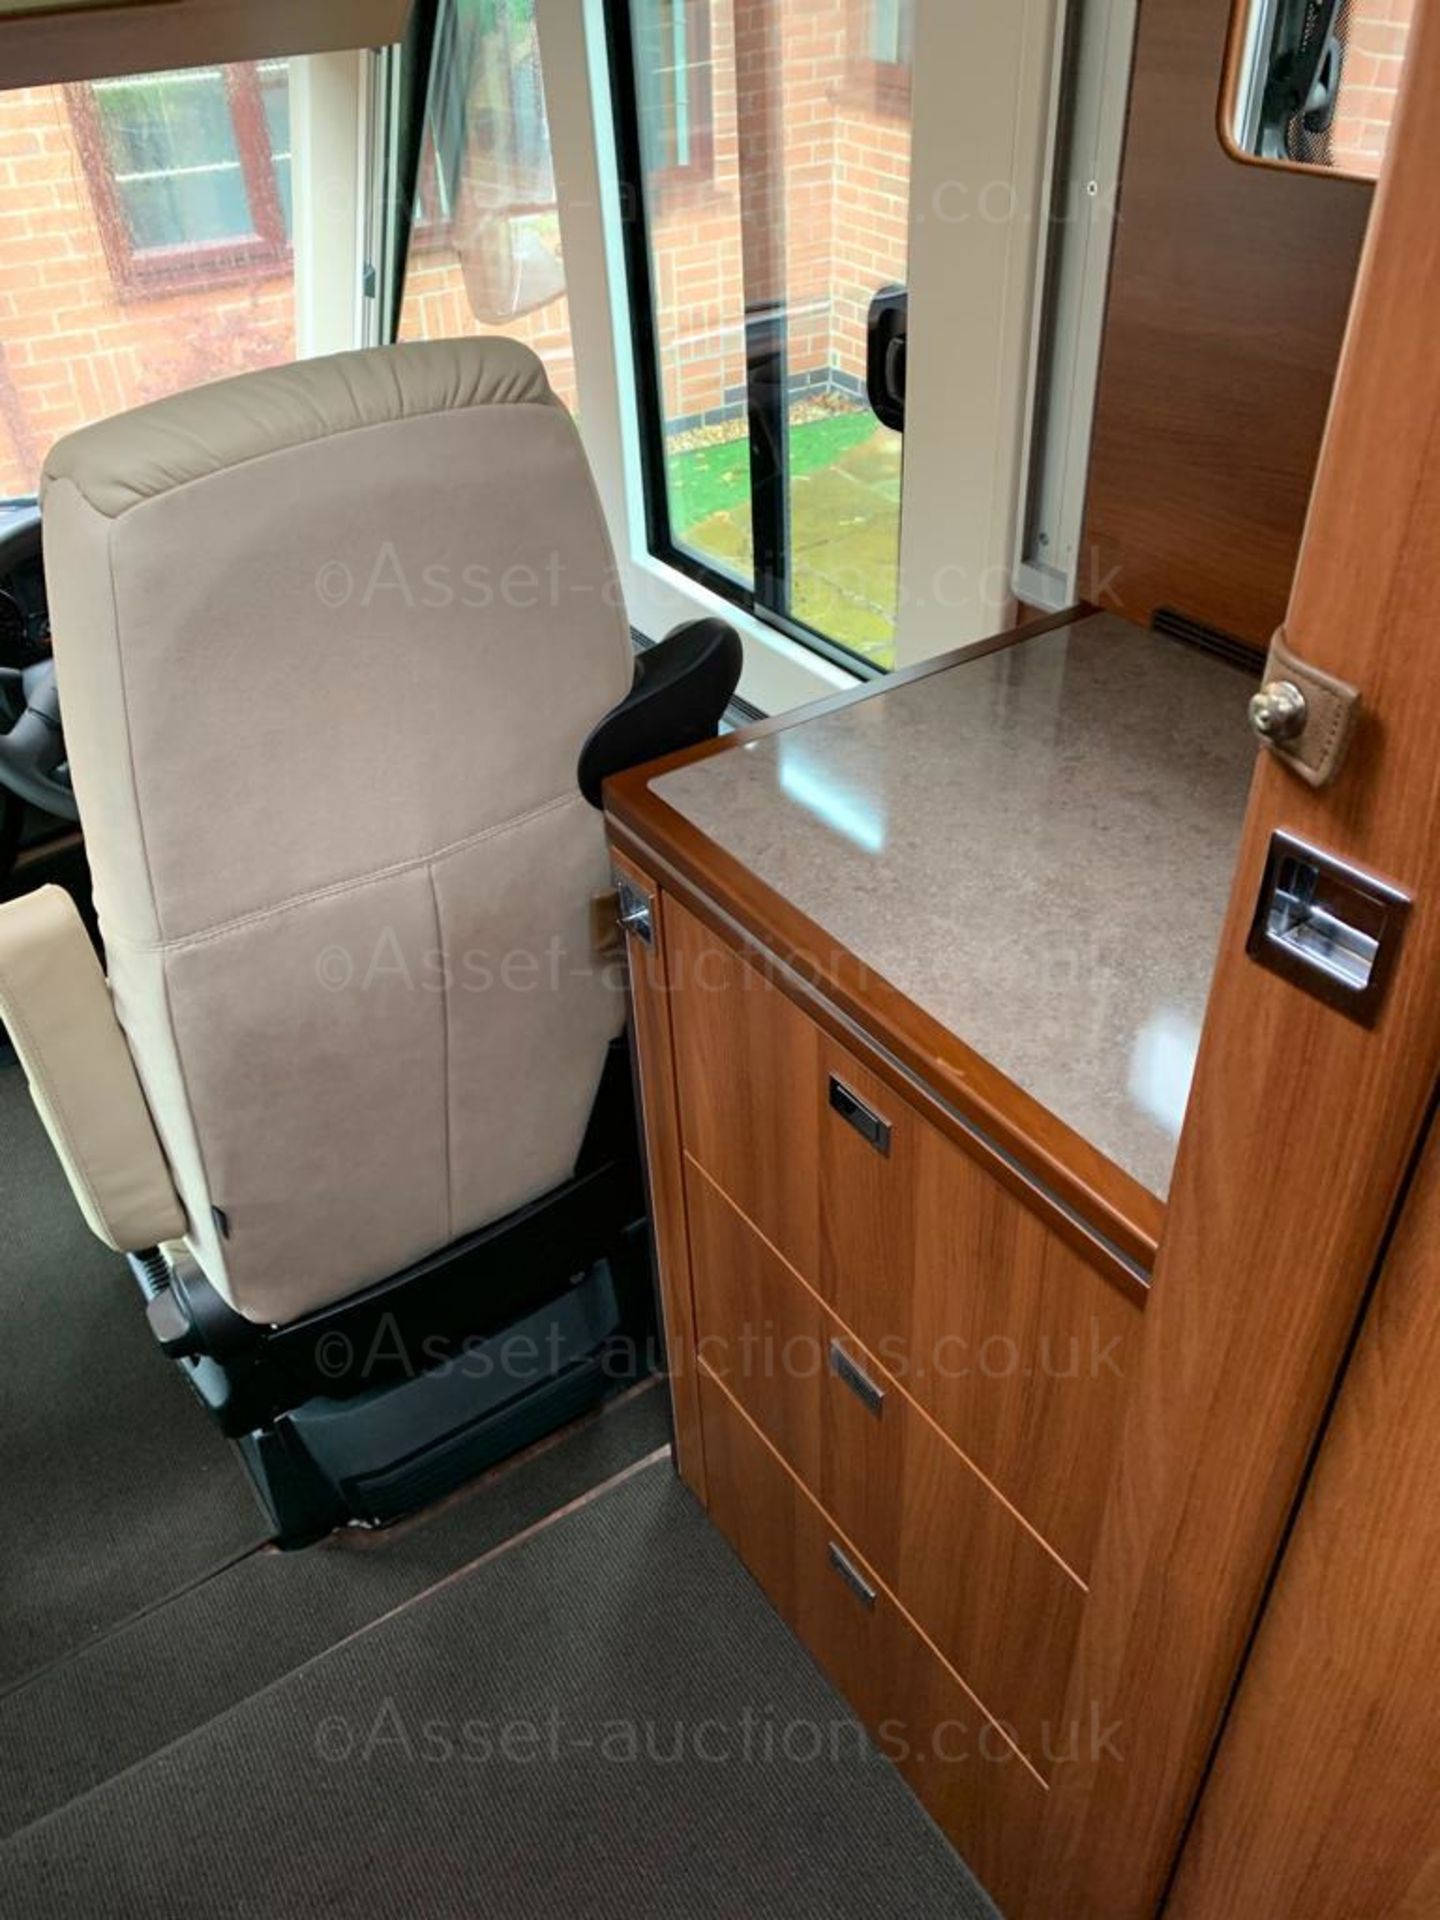 2020 CARTHAGO LINER-FOR-TWO 53L MOTORHOME, SHOWING 4529 MILES, MINT CONDITION *NO VAT* - Image 33 of 33